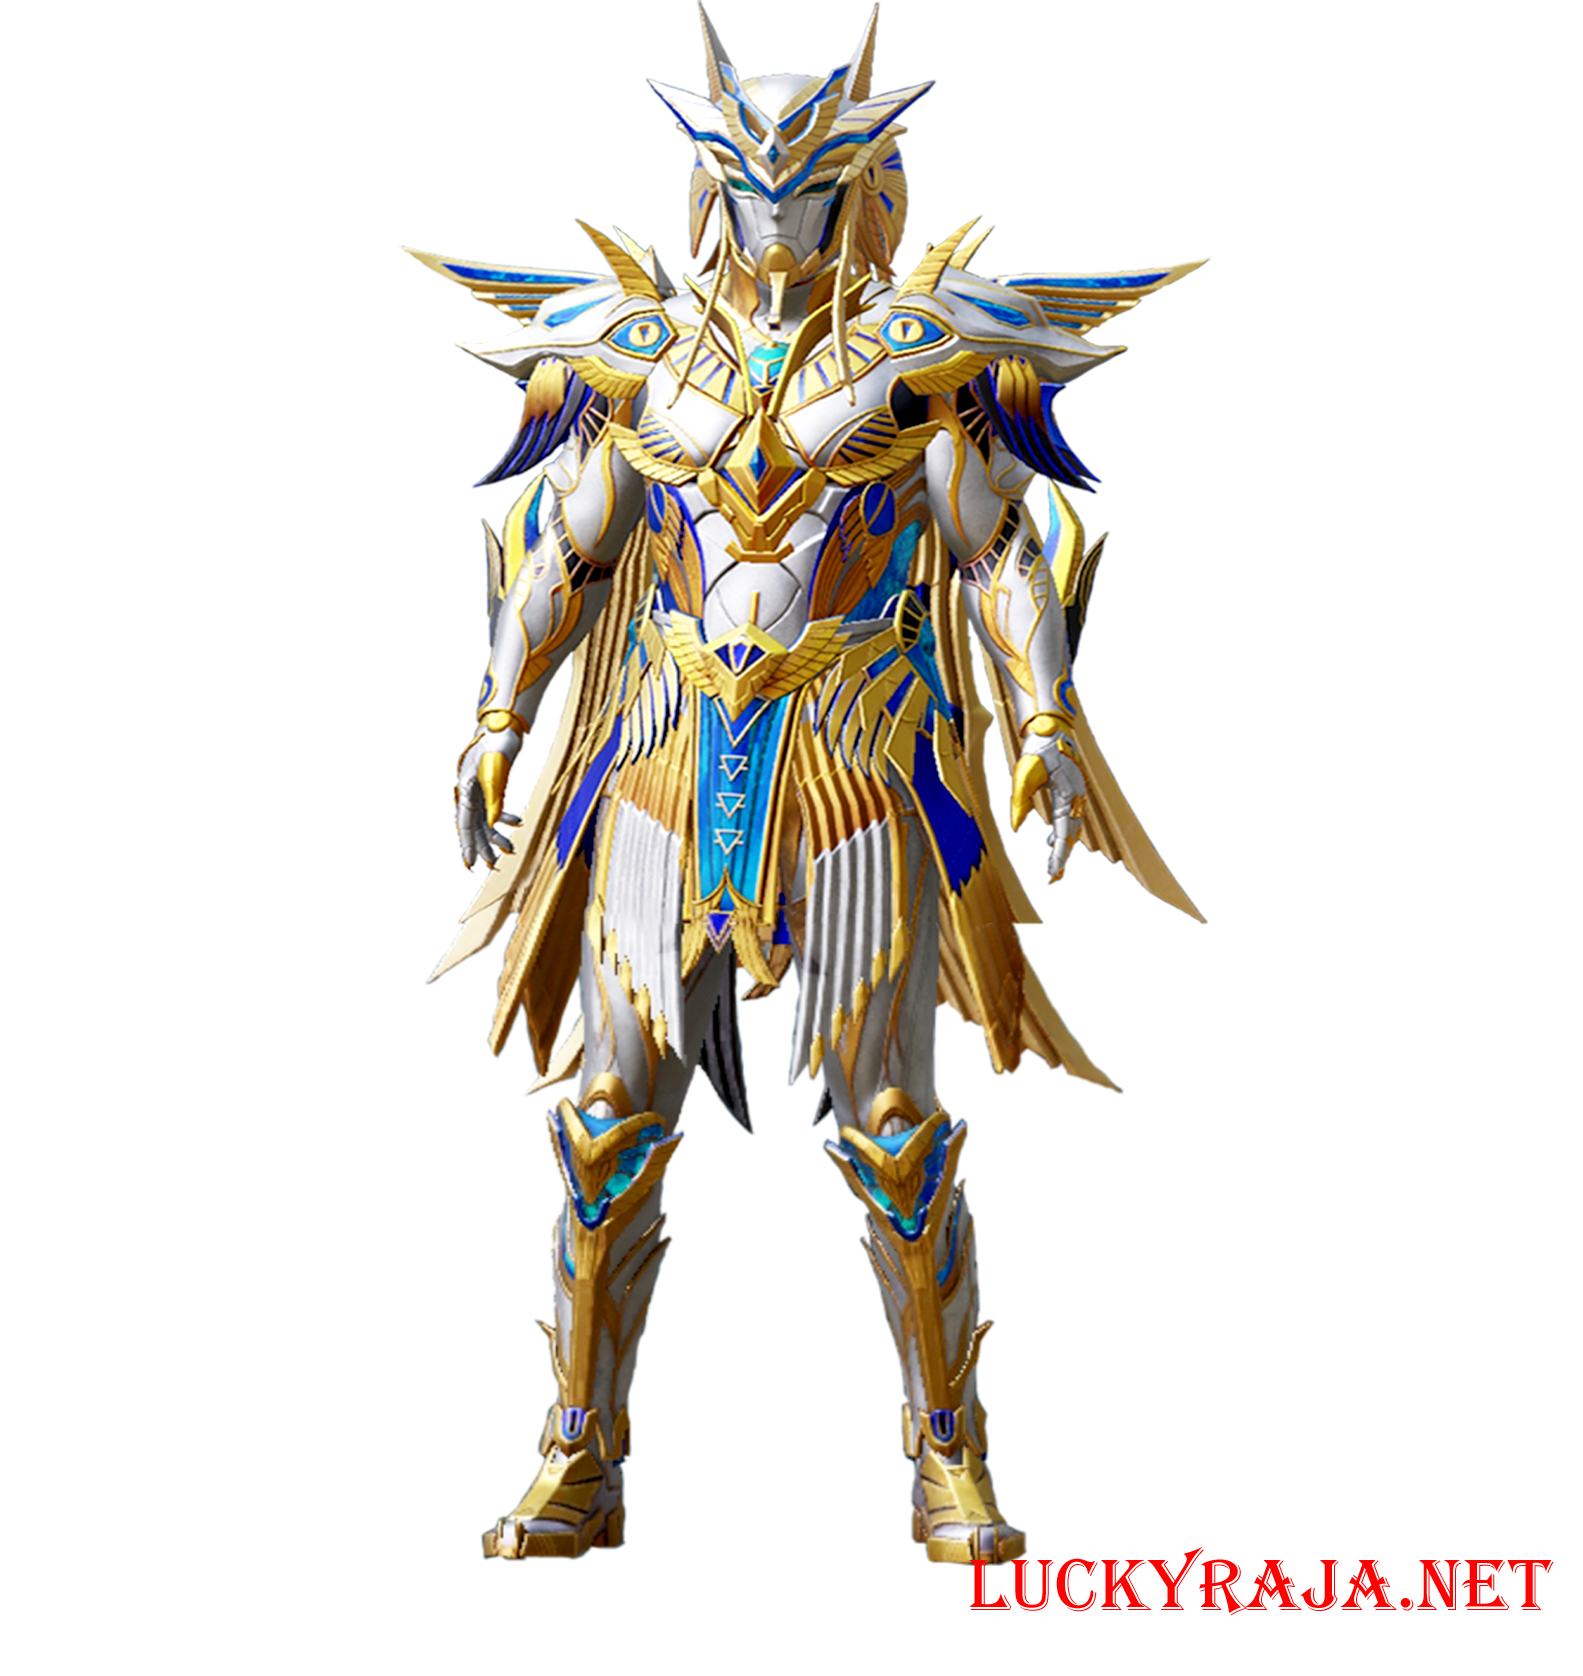 Golden pharaoh X- suit 7 star ,New Golden pharaoh x suit,Golden pharaoh pubg mobile,Golden pharaoh outfit,New Golden pharaoh x suit images,new x suit outfits,animation,cartoon images